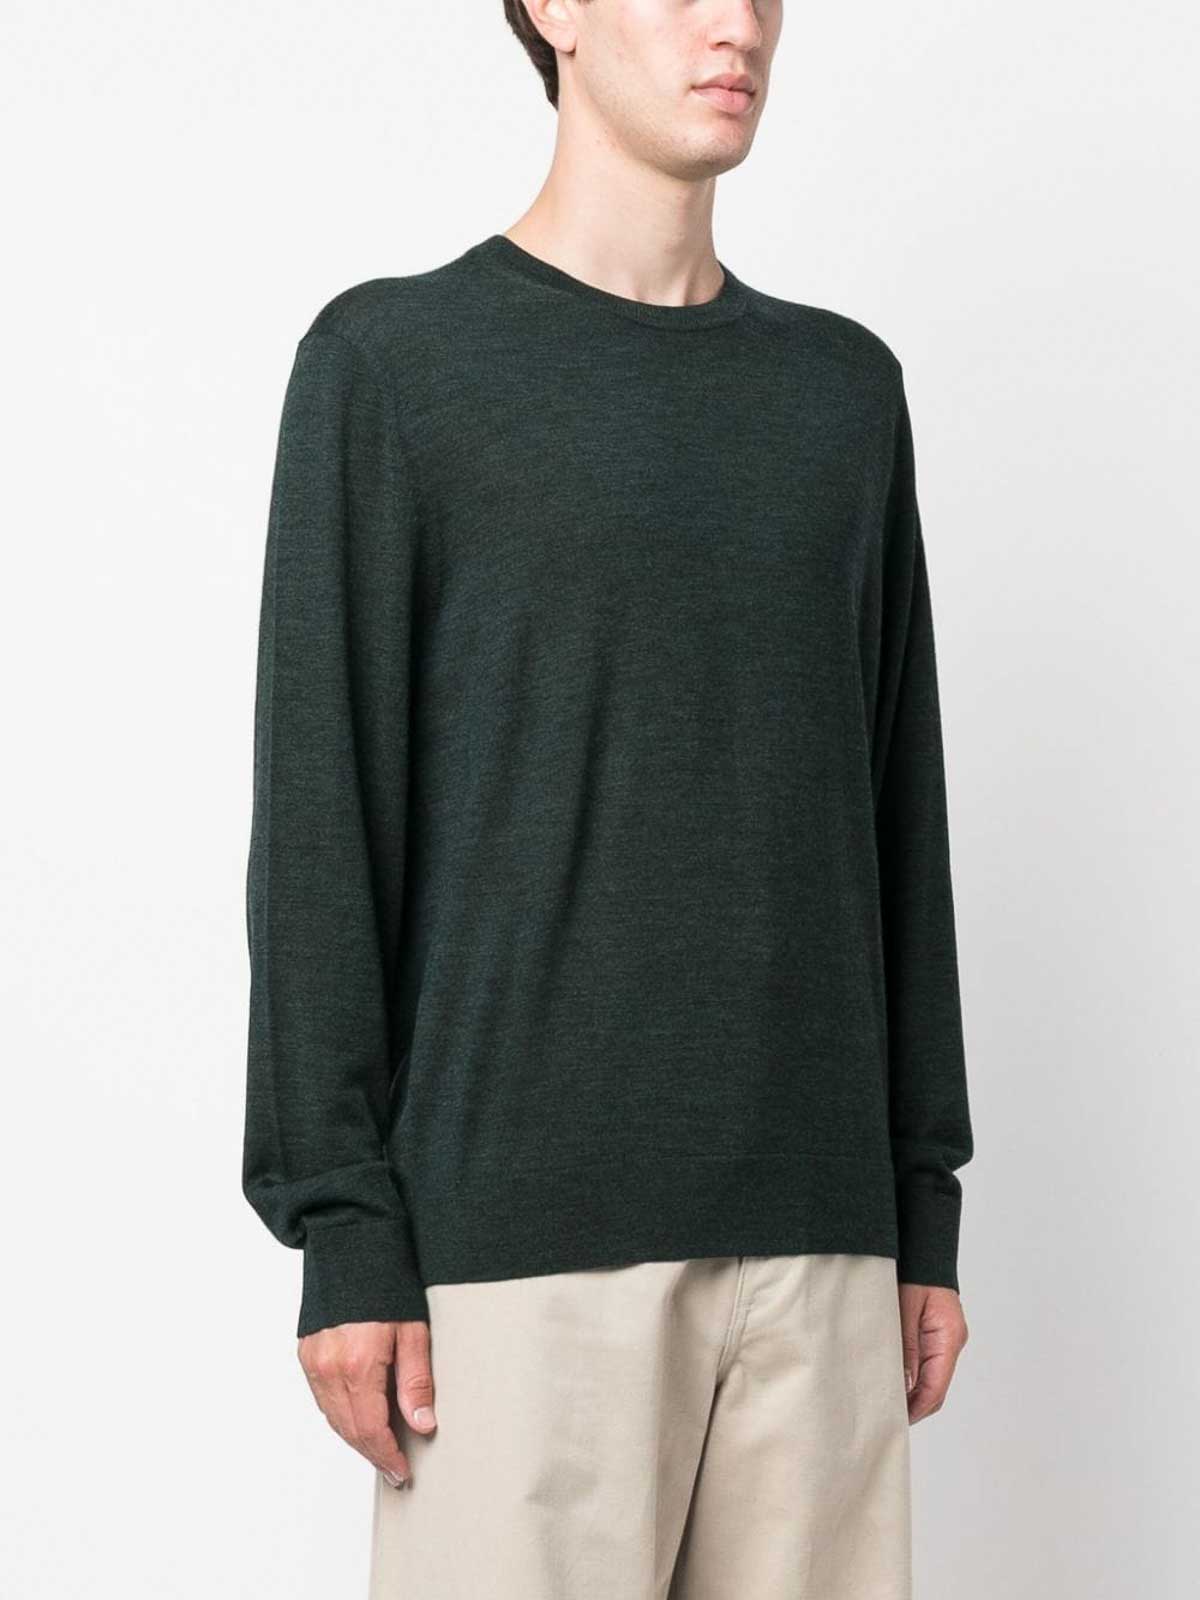 Shop Michael Kors Wool Pullover In Green